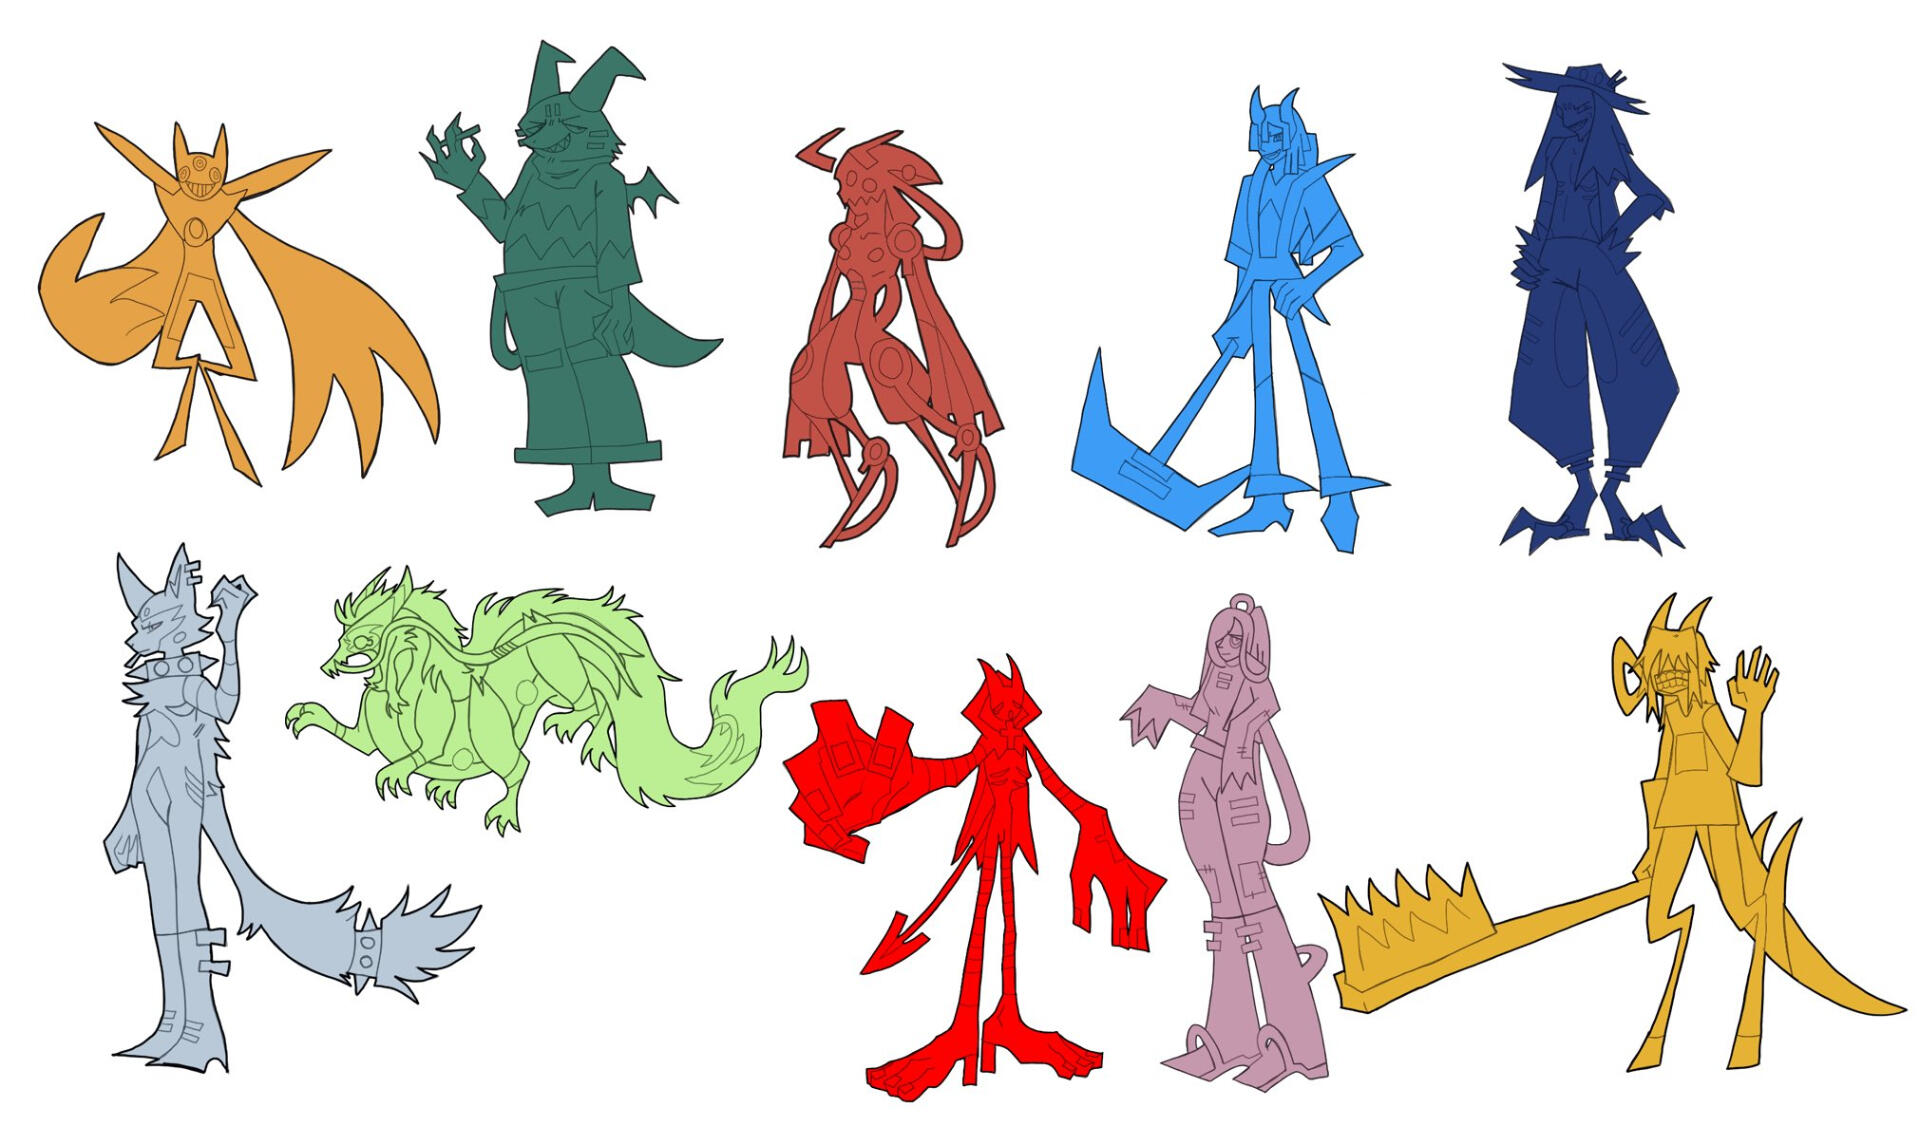 This was a personal challenge where I offered to redesign some of my mutual's personal characters on twitter. I took the time to make sure each had a distinctly different silhouette, theme, and pallet. Done in 2021.